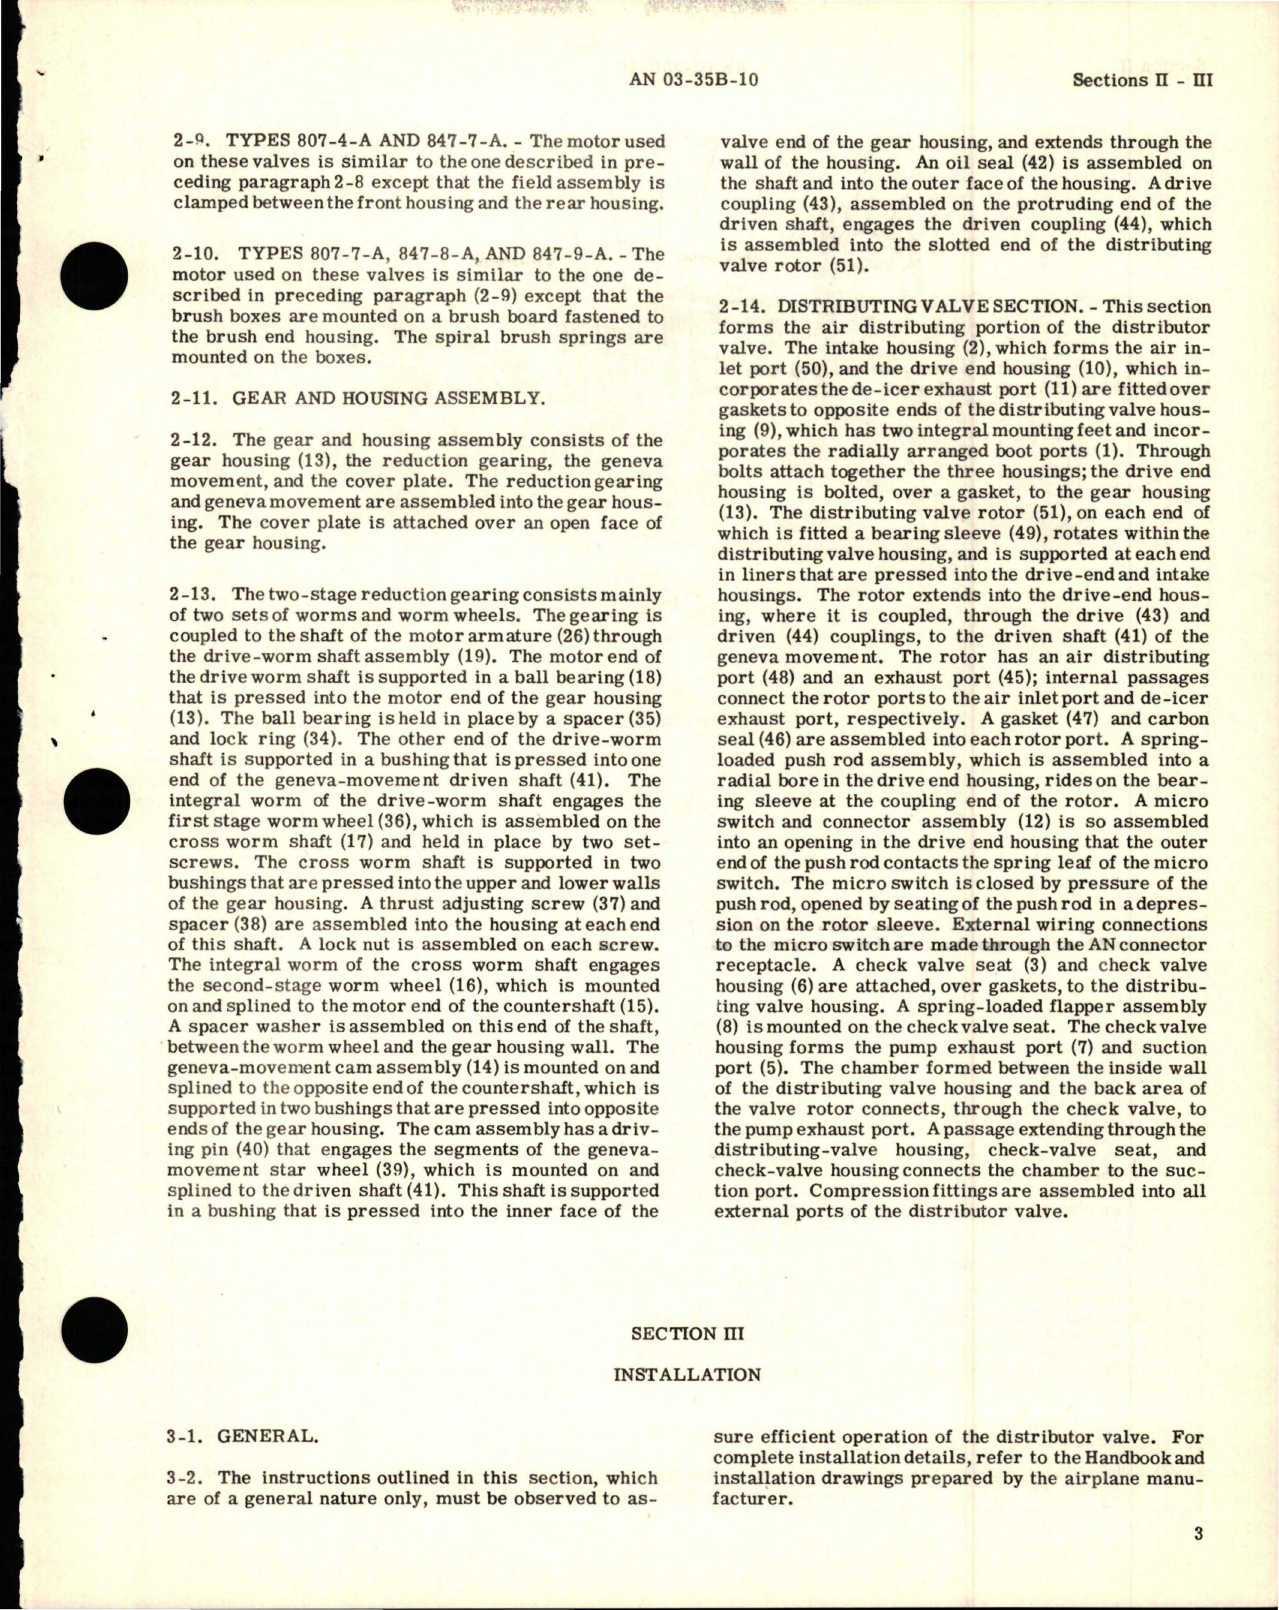 Sample page 9 from AirCorps Library document: Operation, Service, and Overhaul Instructions with Parts Catalog for Snap-Action De-Icer Air Distribution Valves - Types 807 and 847